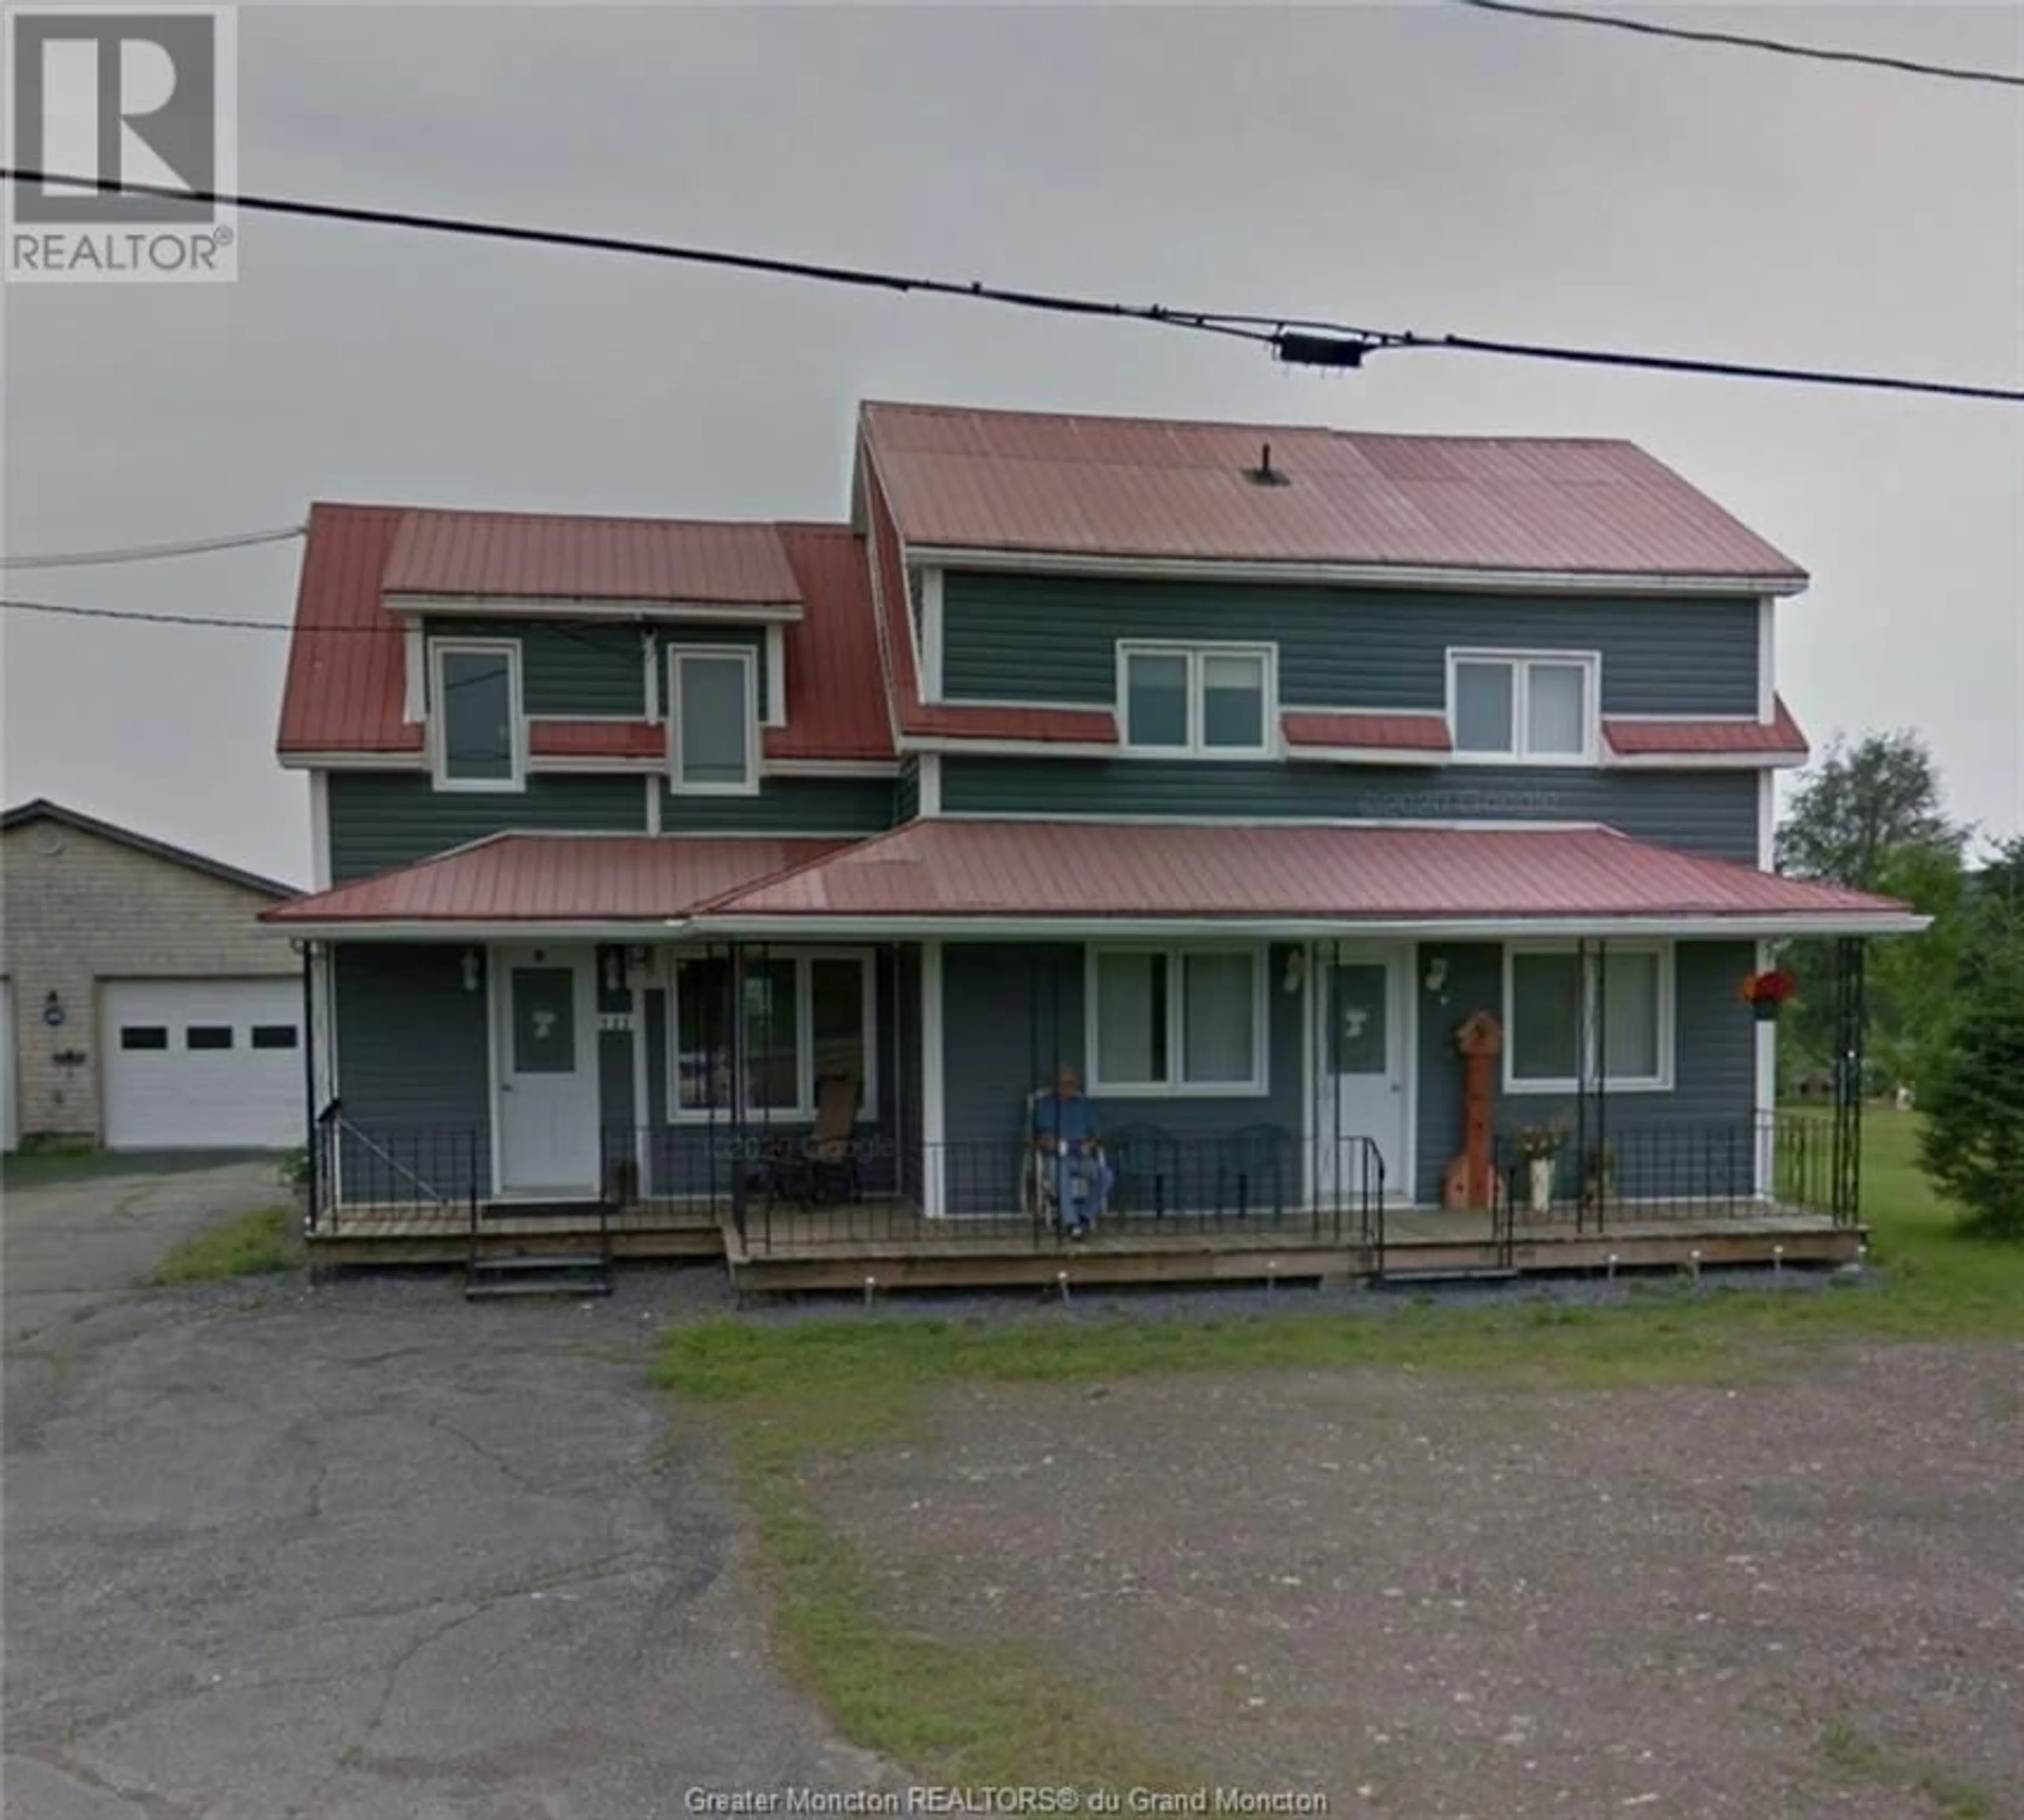 Home with unknown exterior material for 222 Theriault, Sainte-Anne-de-Madawaska New Brunswick E7E1S6